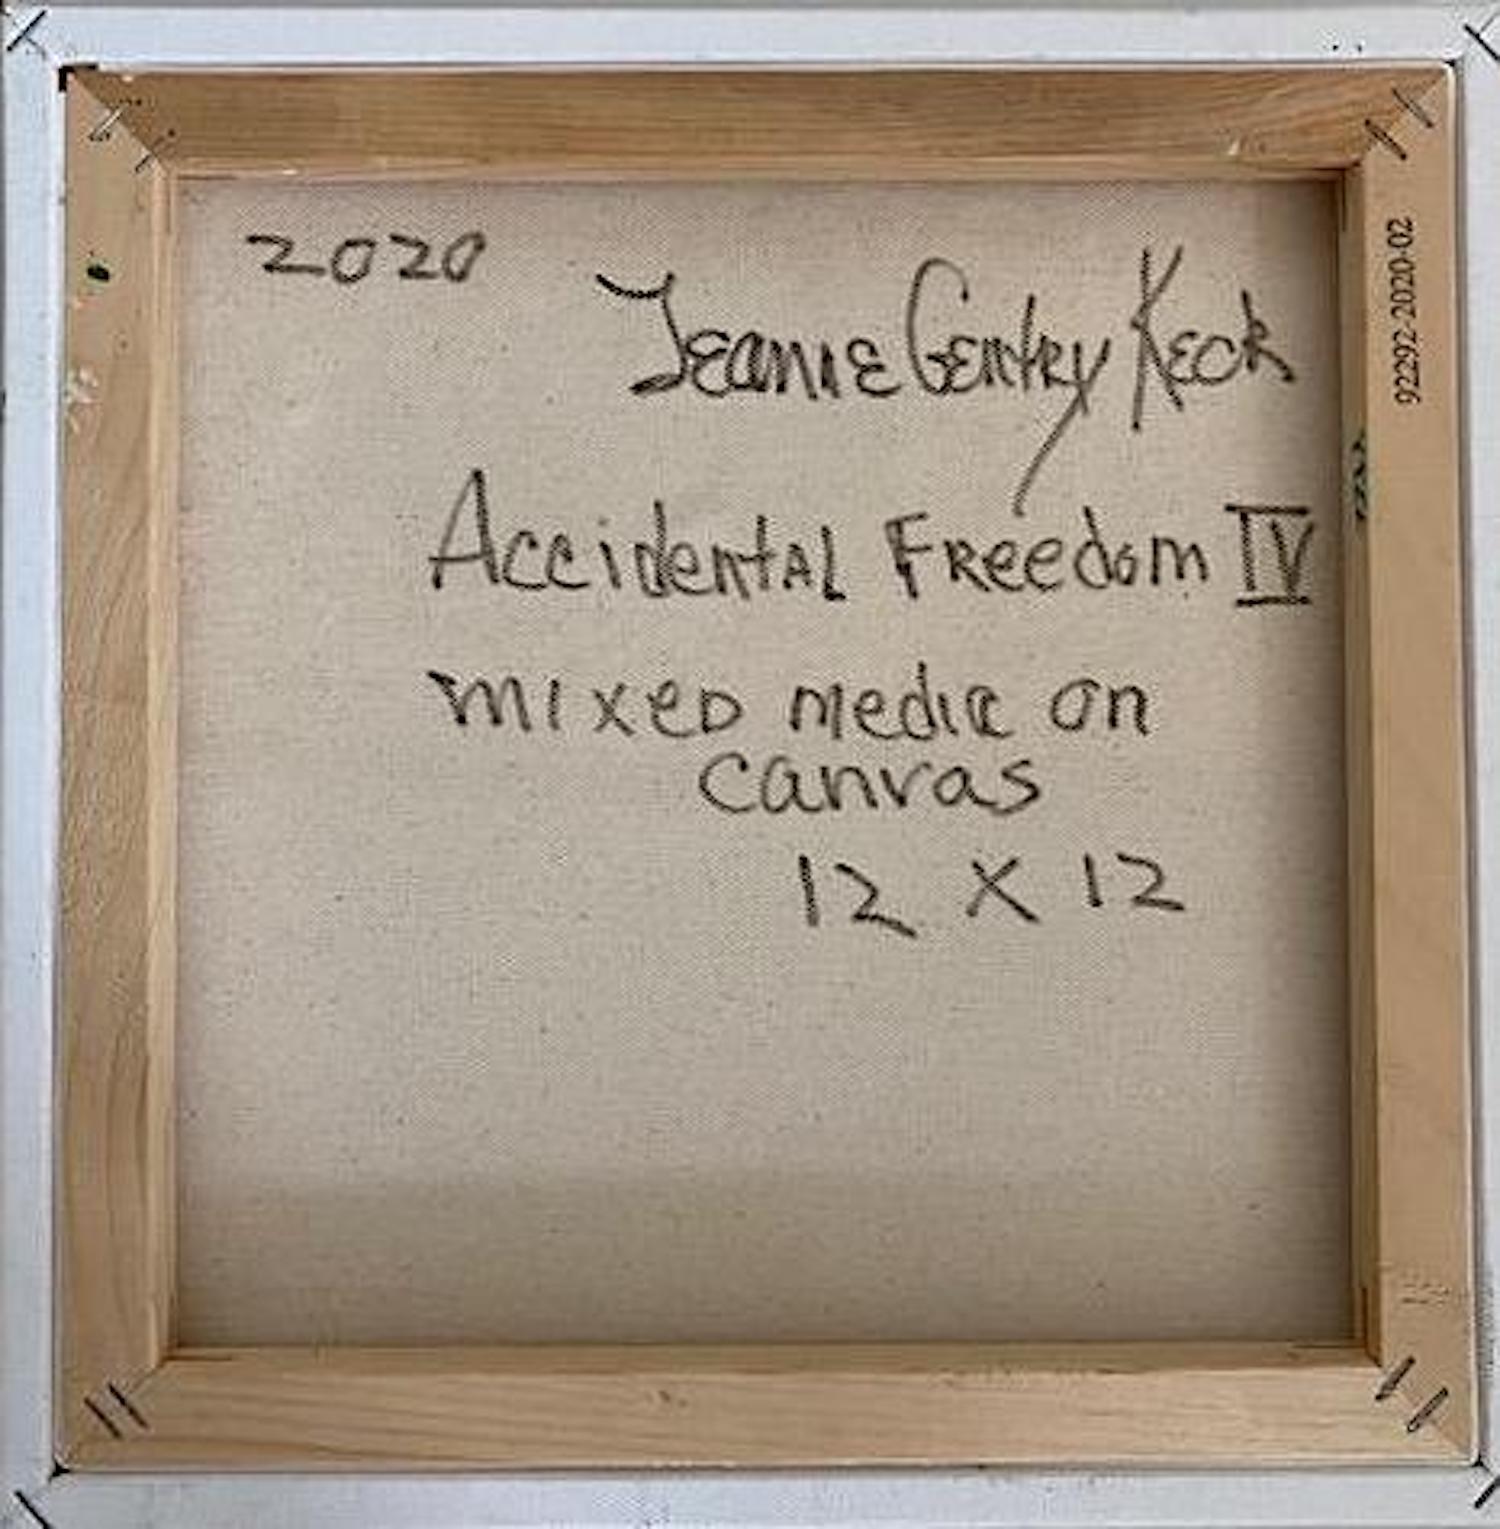 Jeanne Gentry Keck, Accidental Freedom IV, Mixed Media on Canvas, 2020 For Sale 2